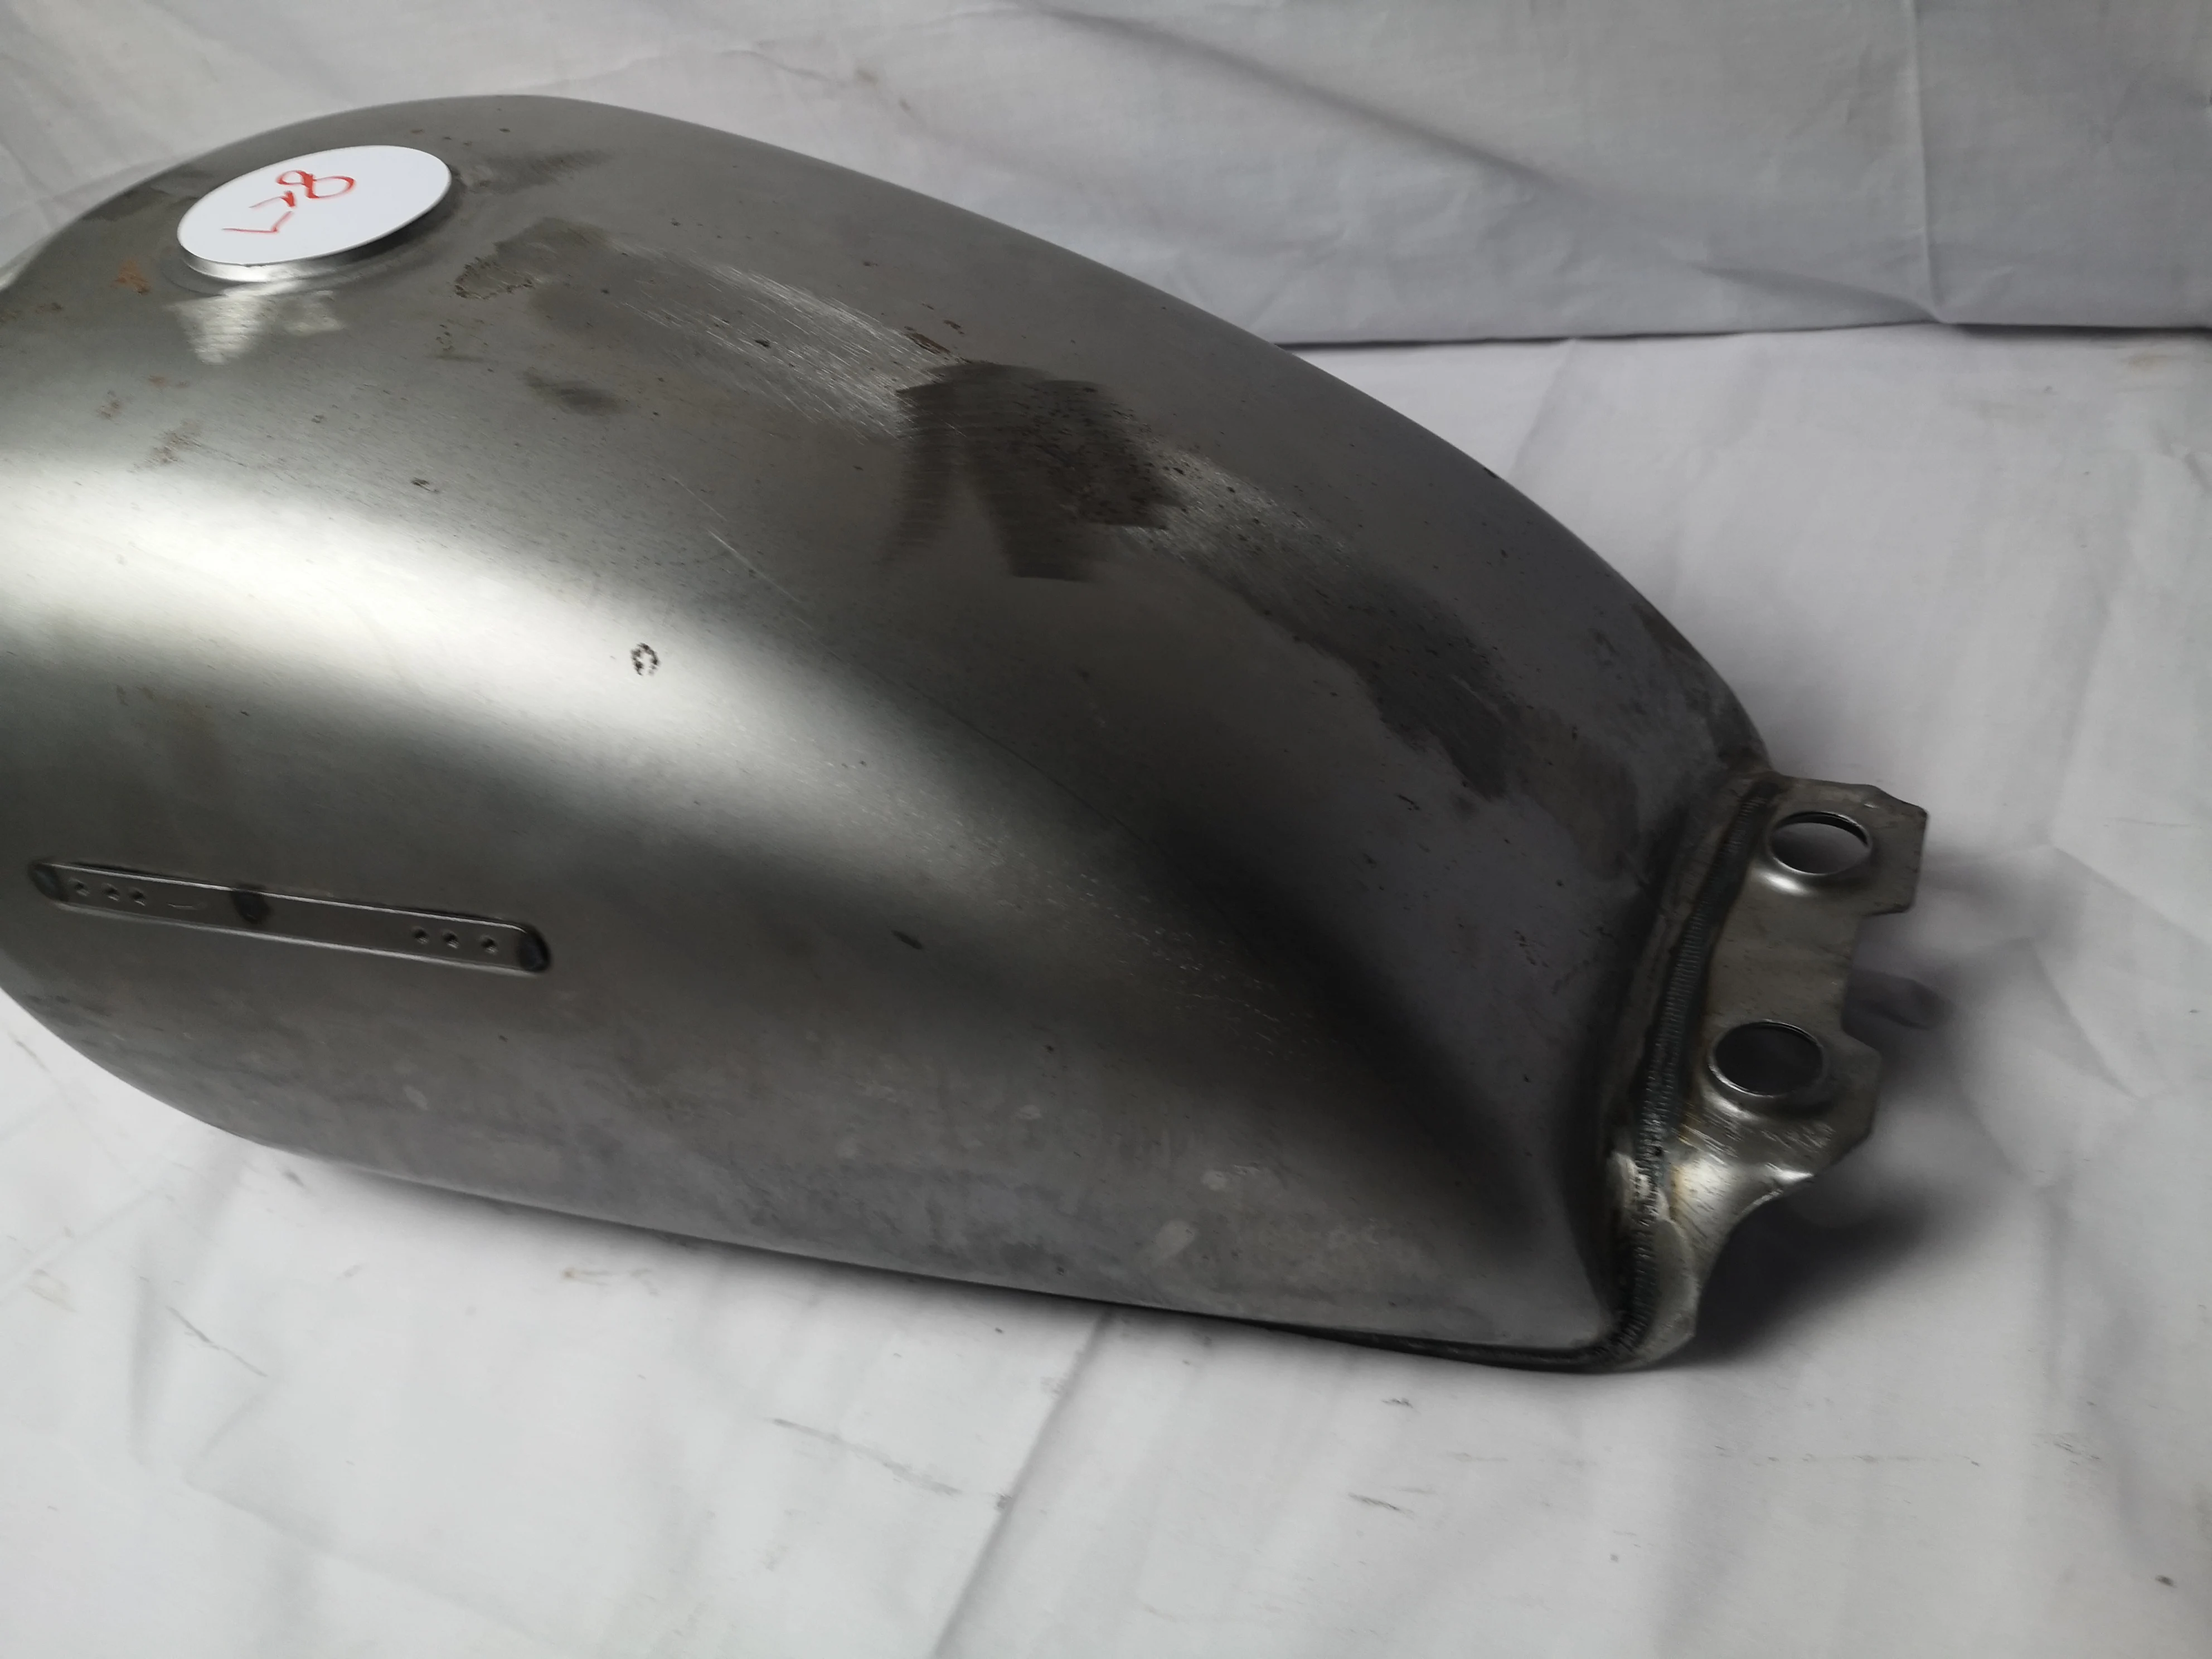 Guaranteed Quality Unique Unpainted Motorcycle Fuel Tank Gm125/gn125 Gas Tank